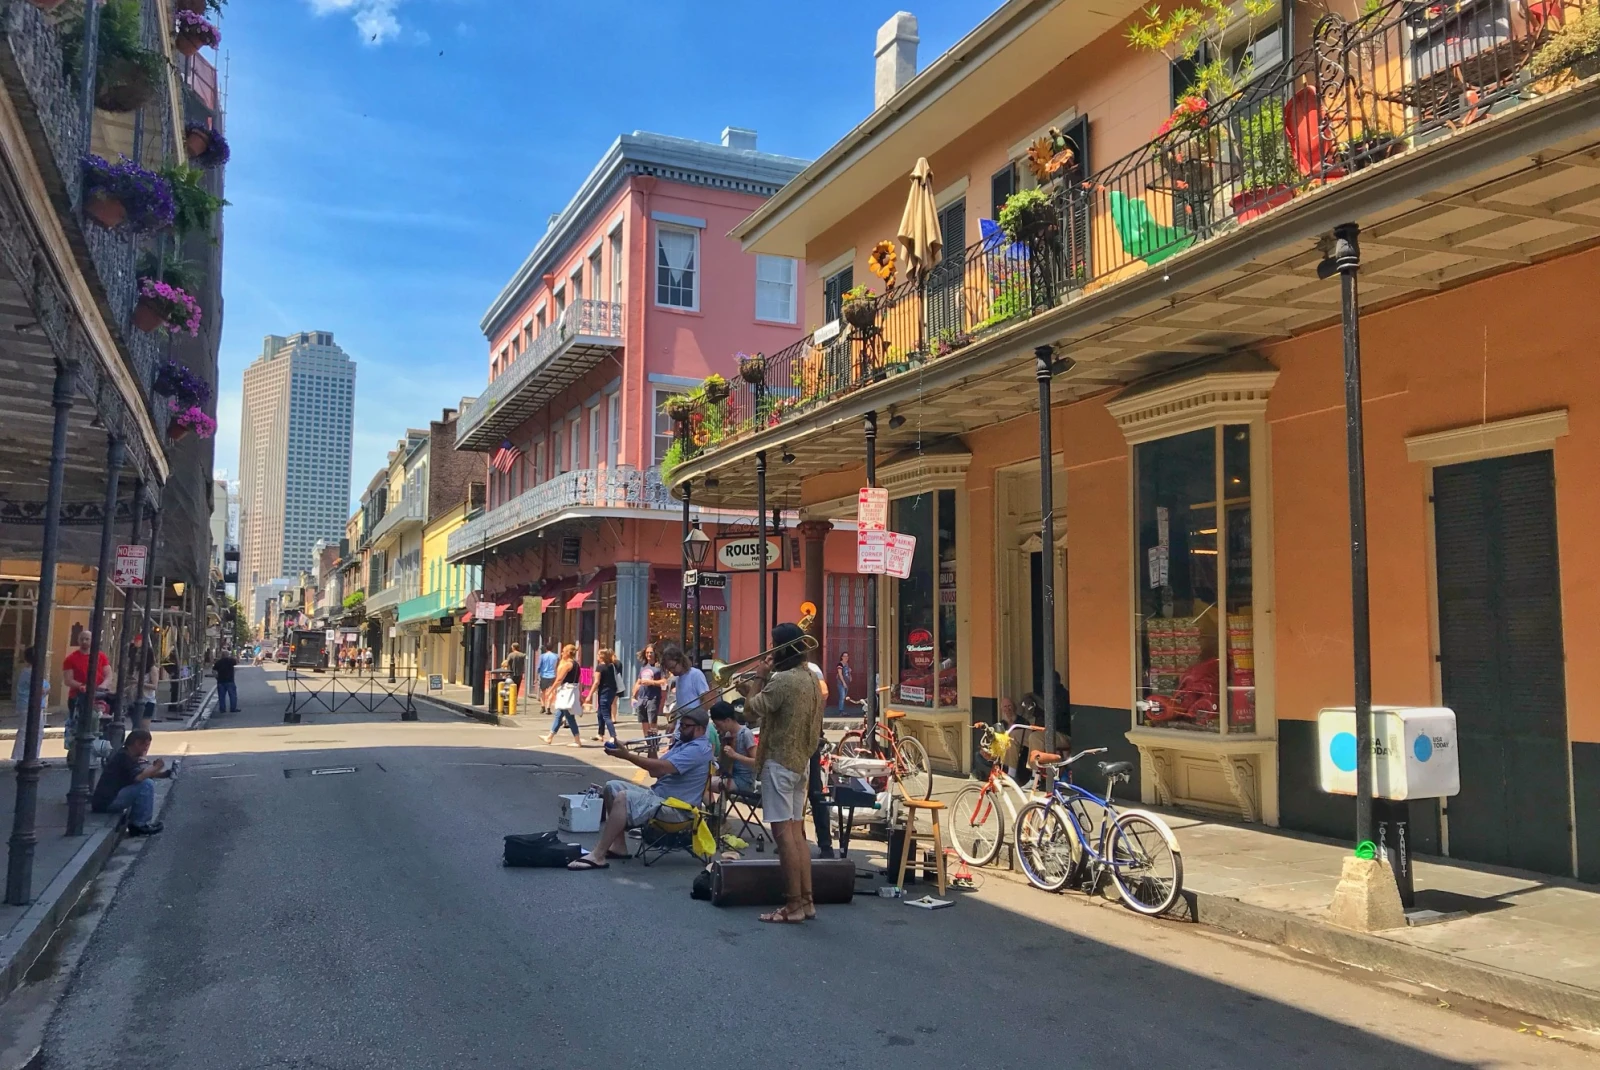 street band performers in New Orleans